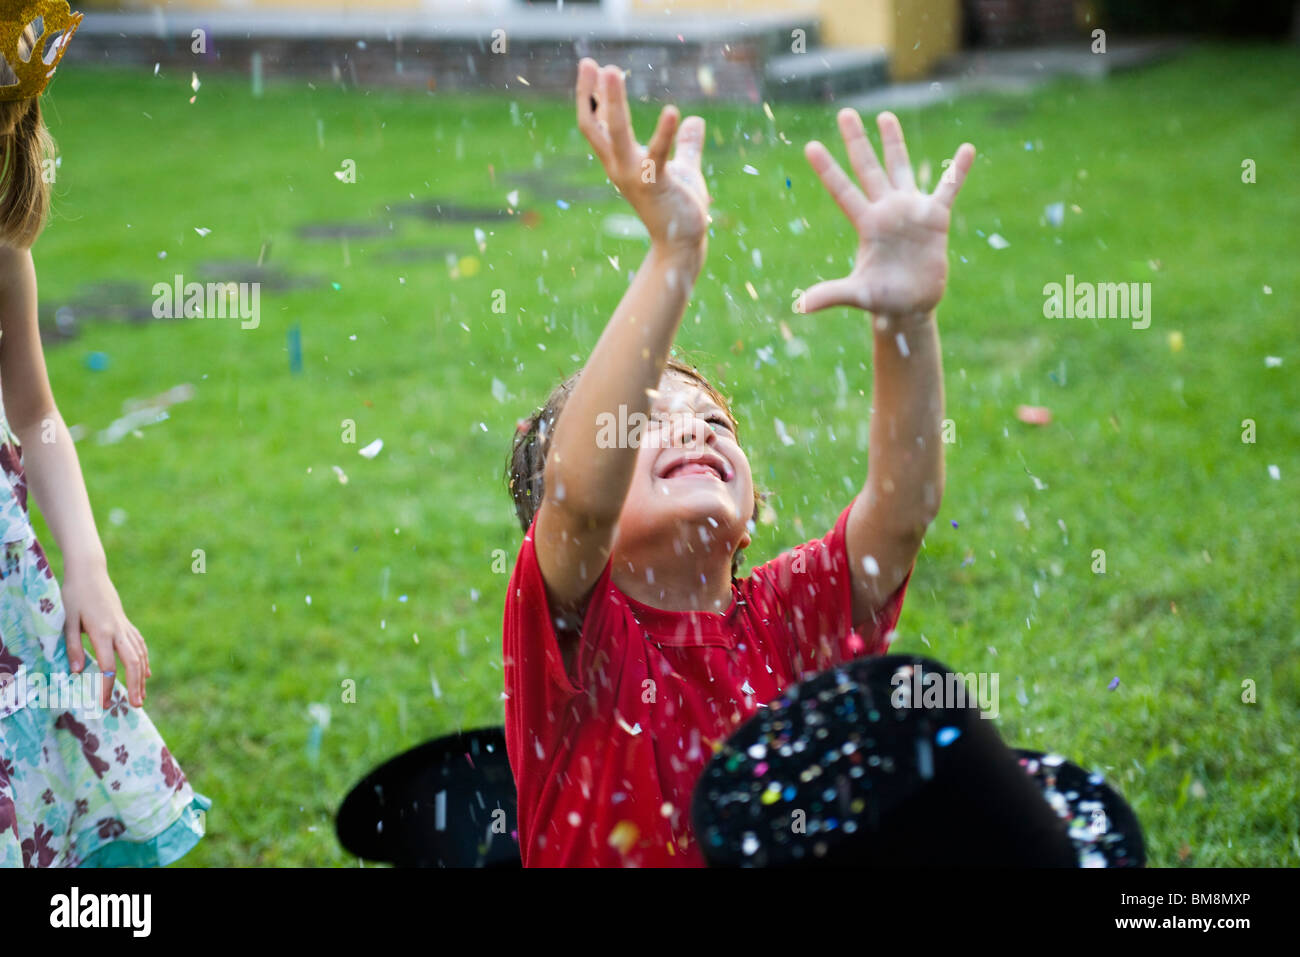 Boy with arms raised showered in falling confetti Stock Photo - Alamy